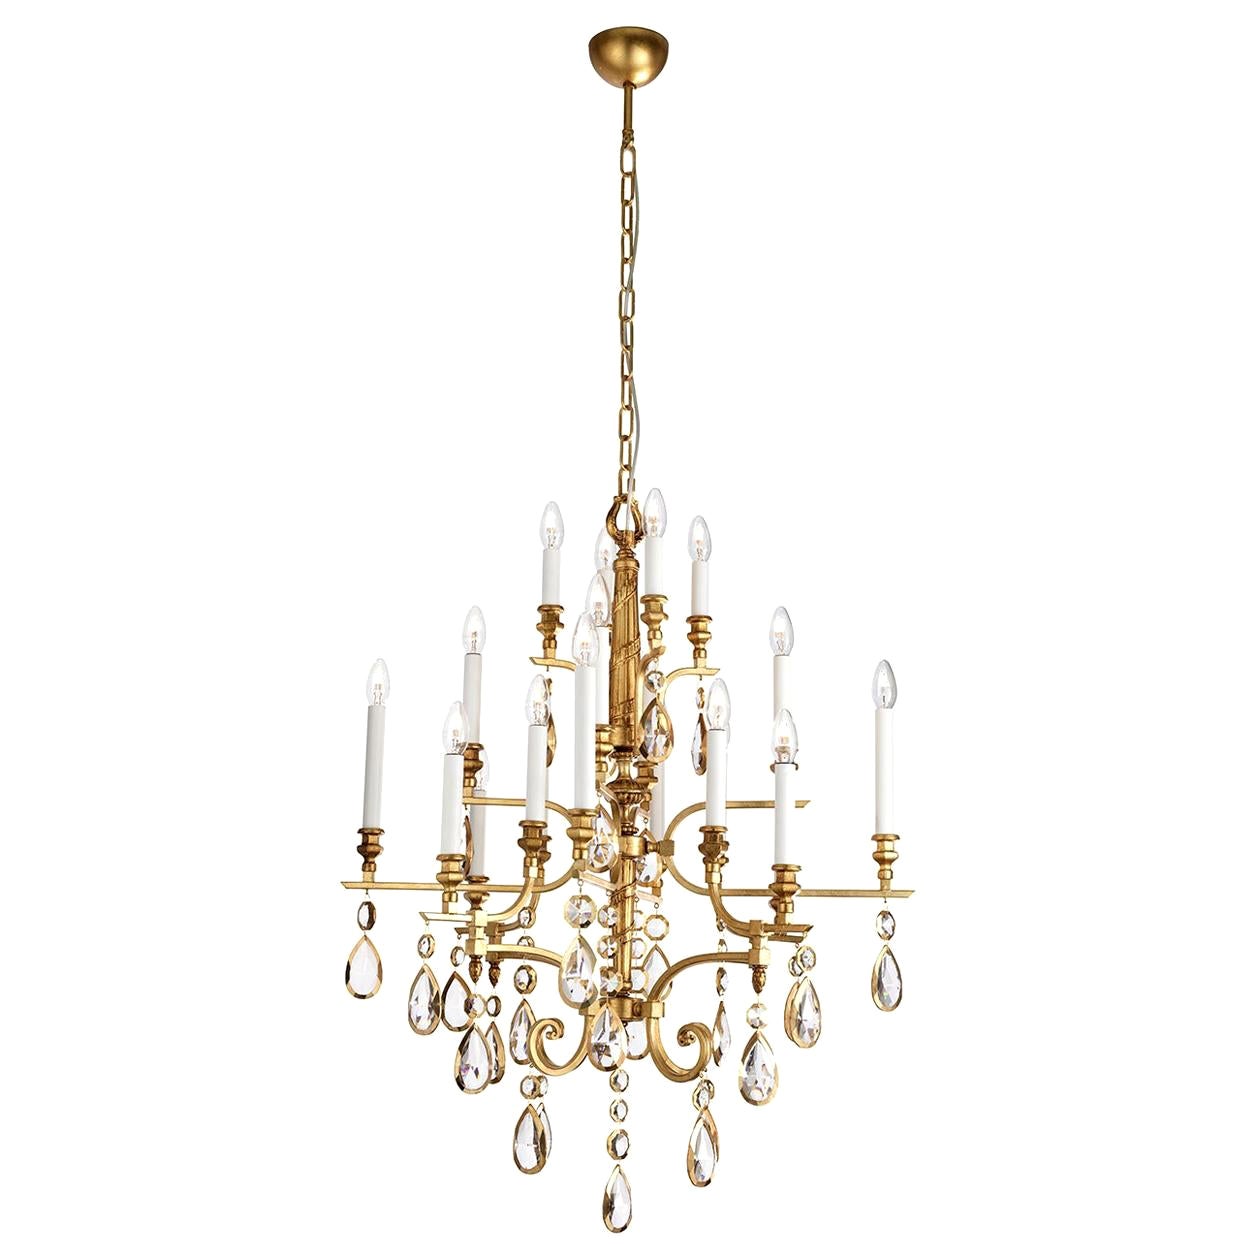 20600 Chandelier For Sale